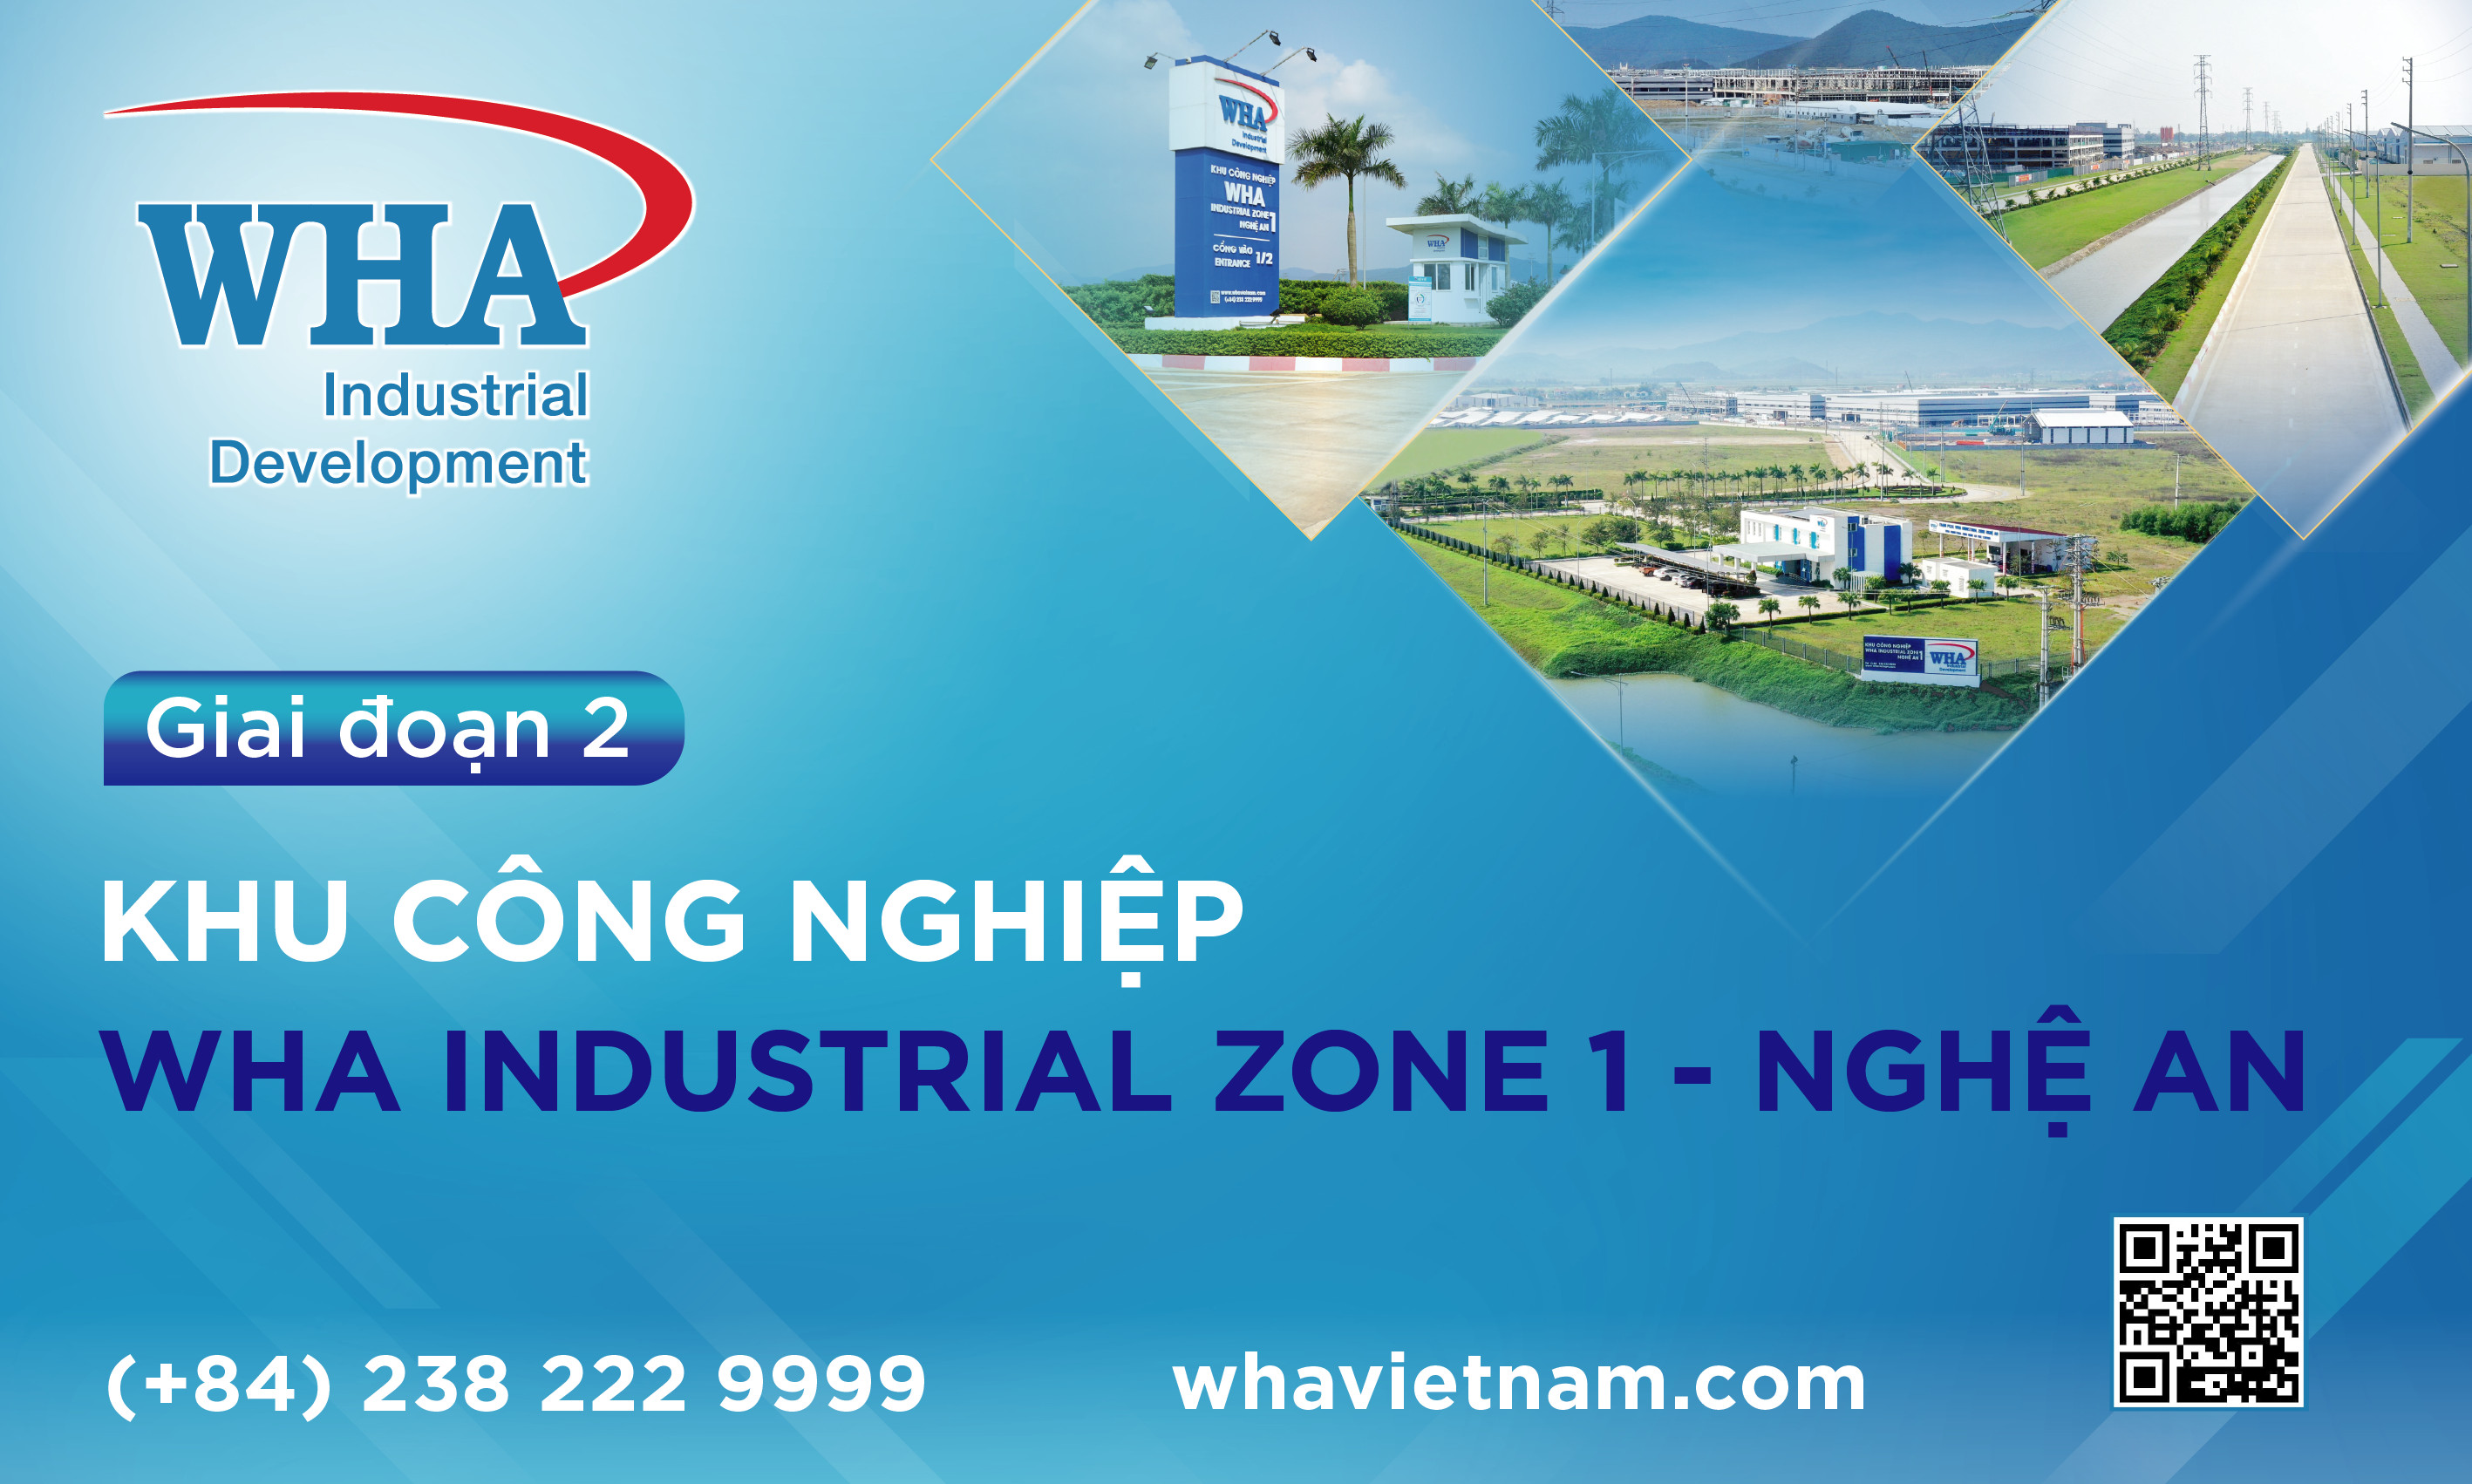 Sunny Optical Investment in WHA Industrial Zone 1 - Nghe An, Vietnam